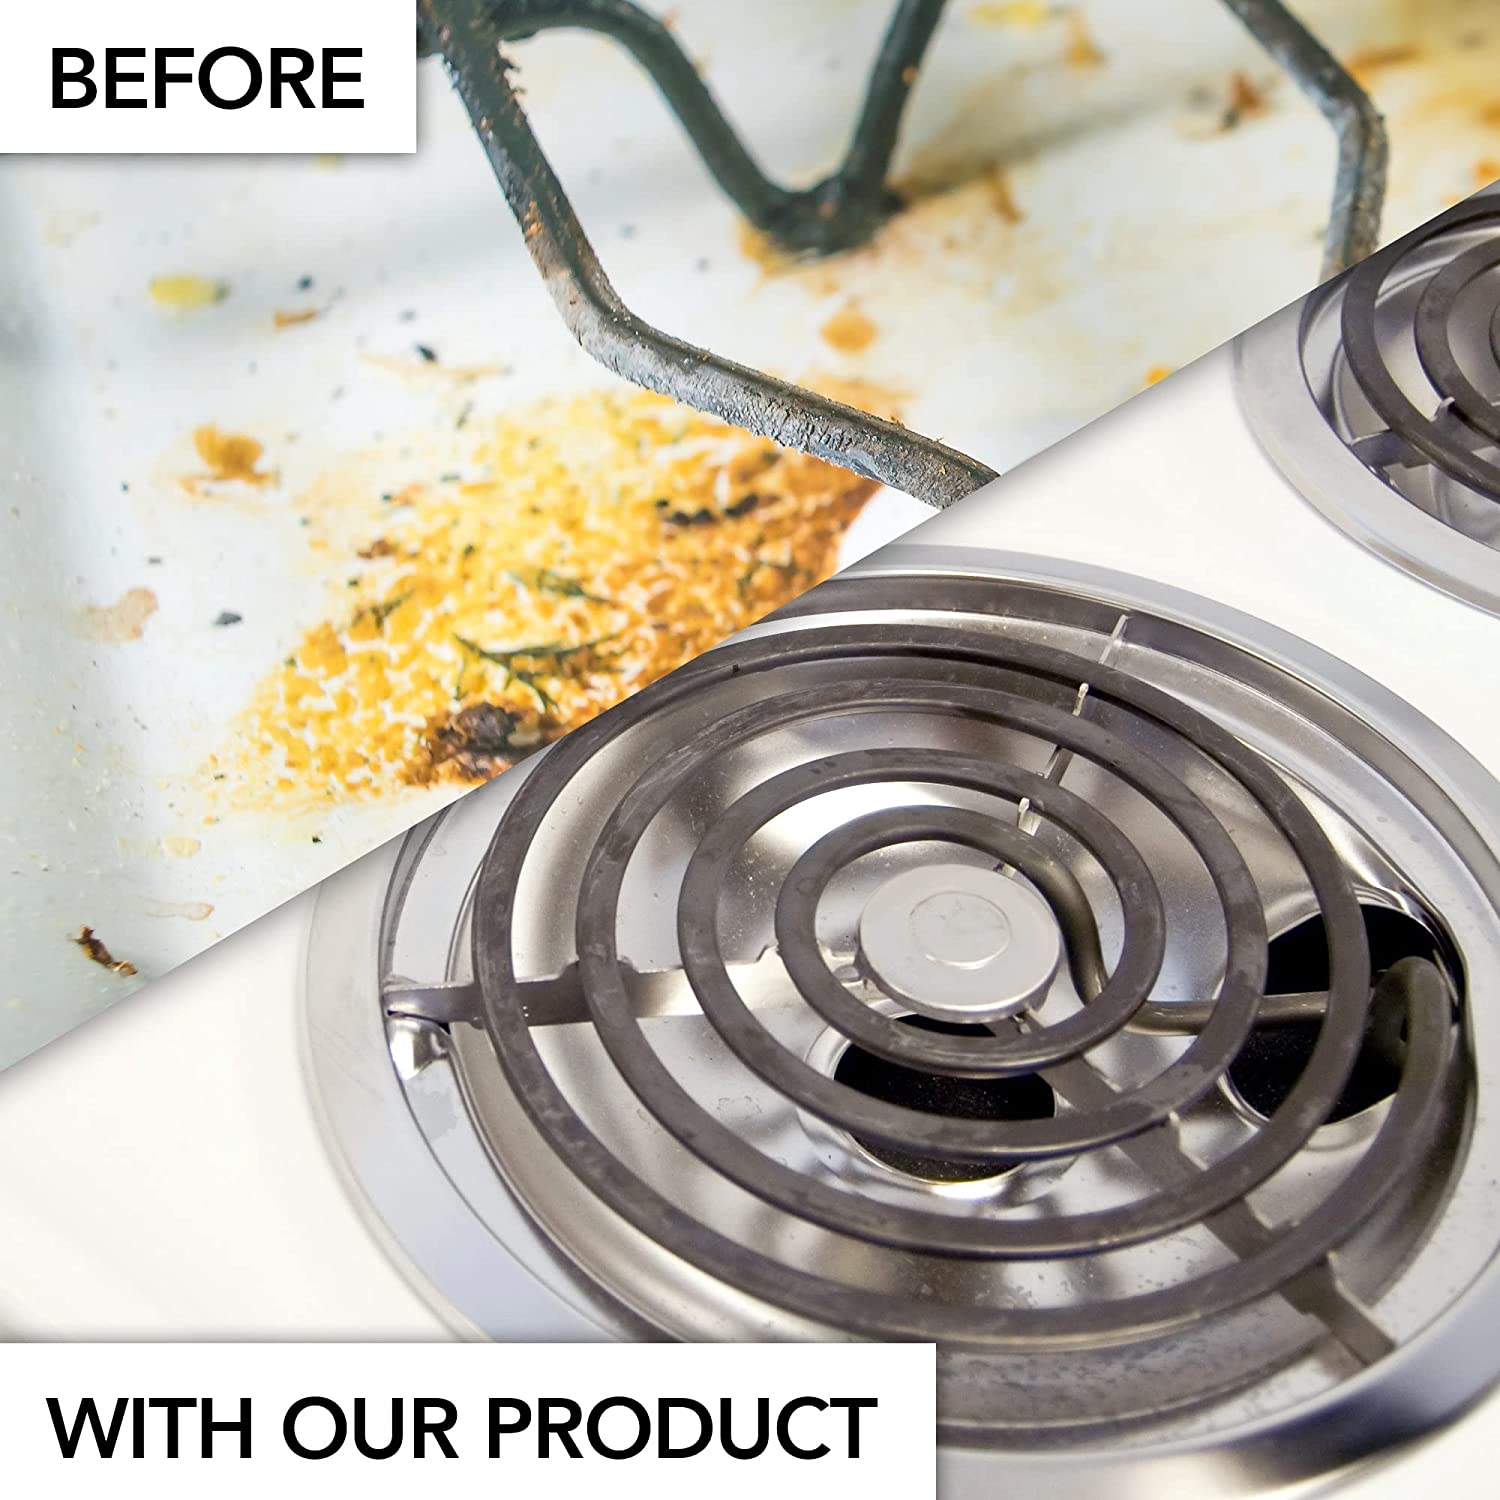 1/4/6pcs Gas Stove Top Cover Non-stick Easy Cleaning Cleaning Gas Stove Top